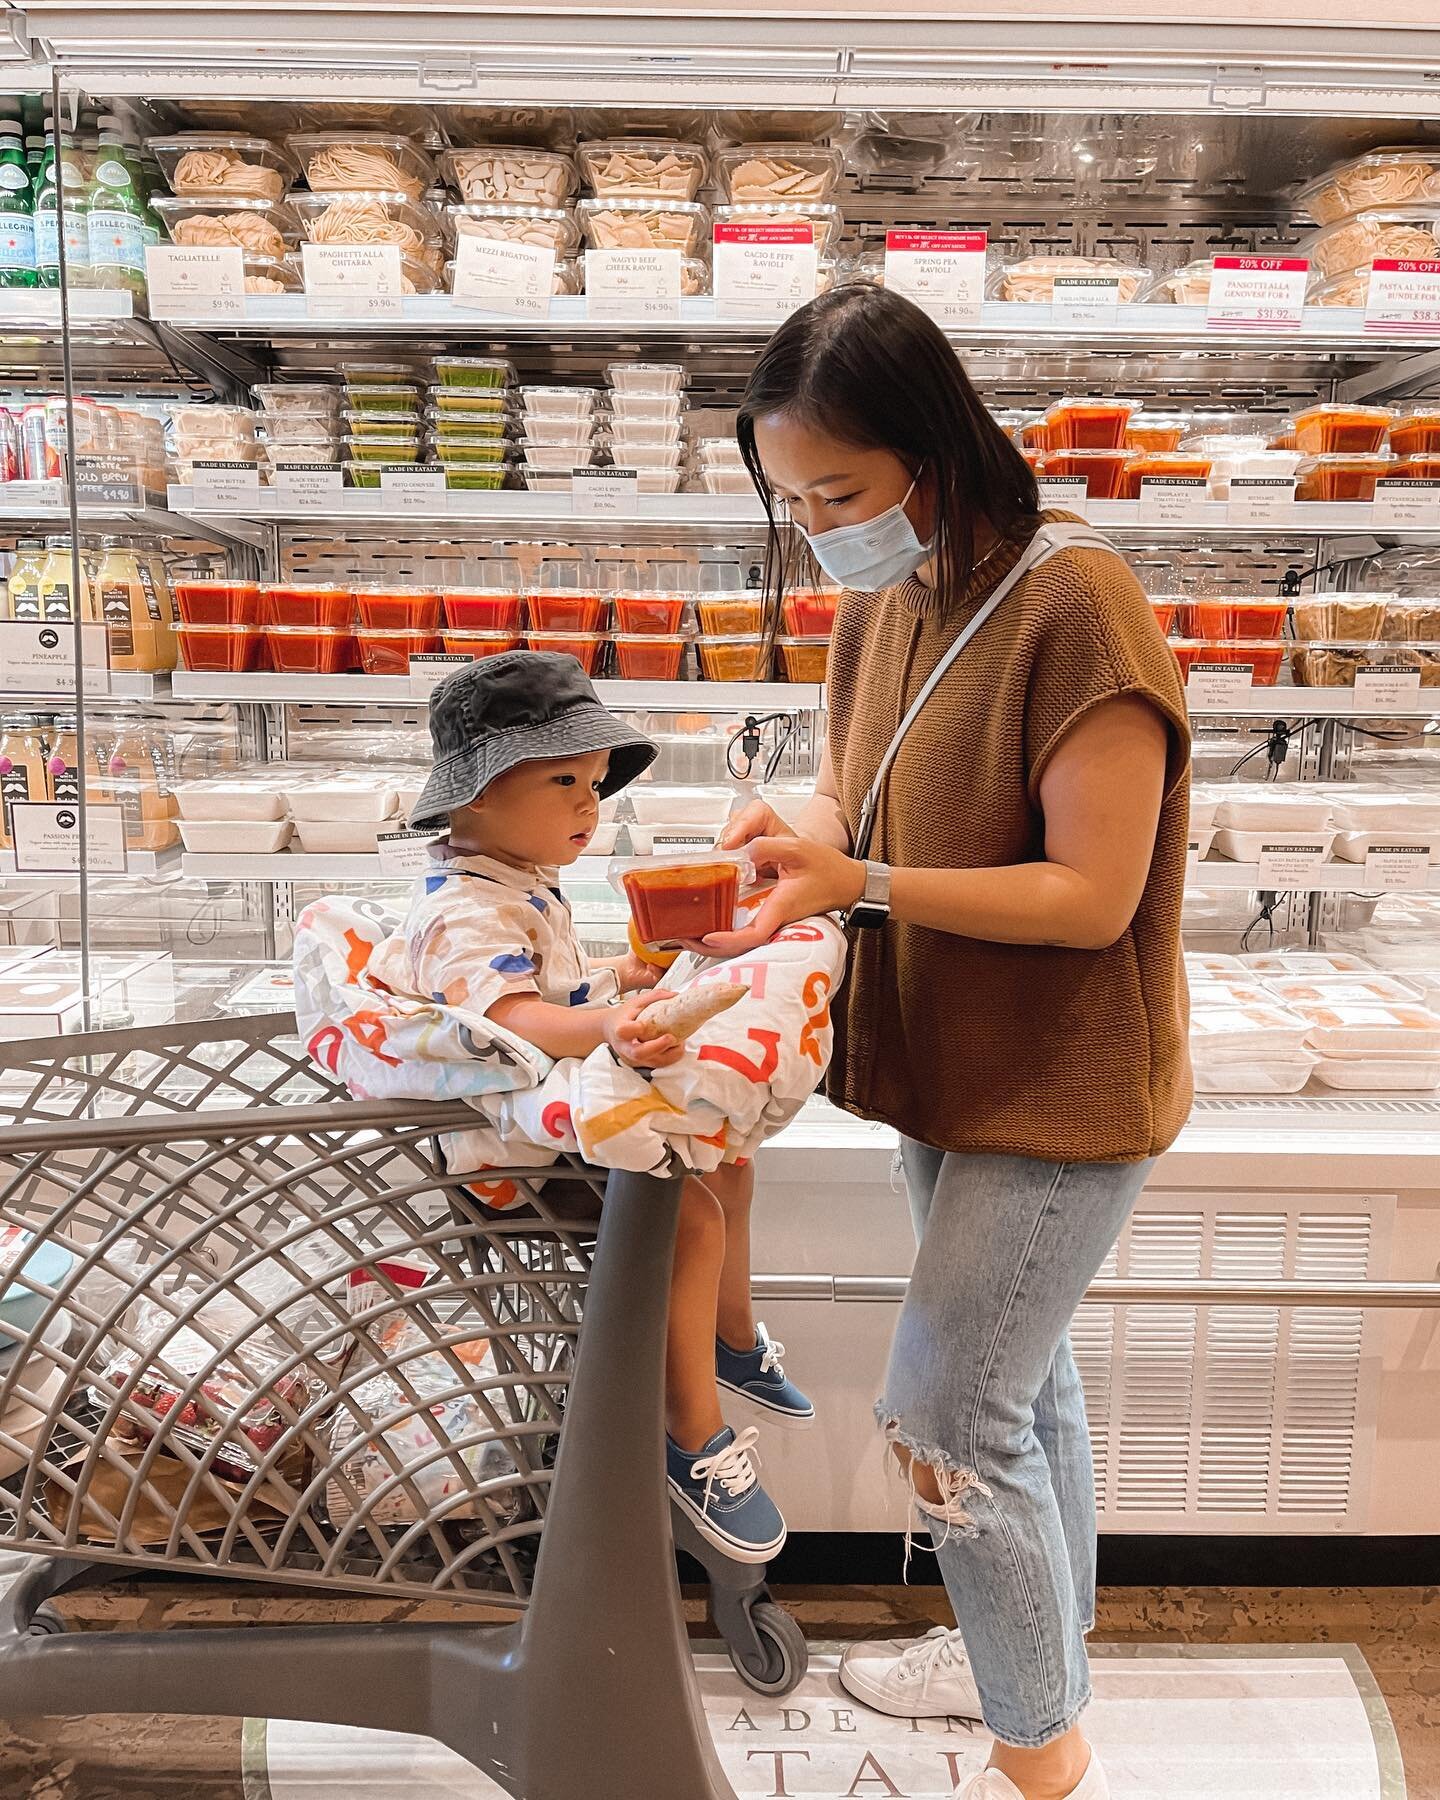 Taking Charlie to my happy place to scour for the best deals this season. @eatalyla&rsquo;s Sale Into Summer is on now featuring dozens of ingredients up to 50% OFF - from housemade favorites to pantry staples.

My go-to is building my own salumi &am